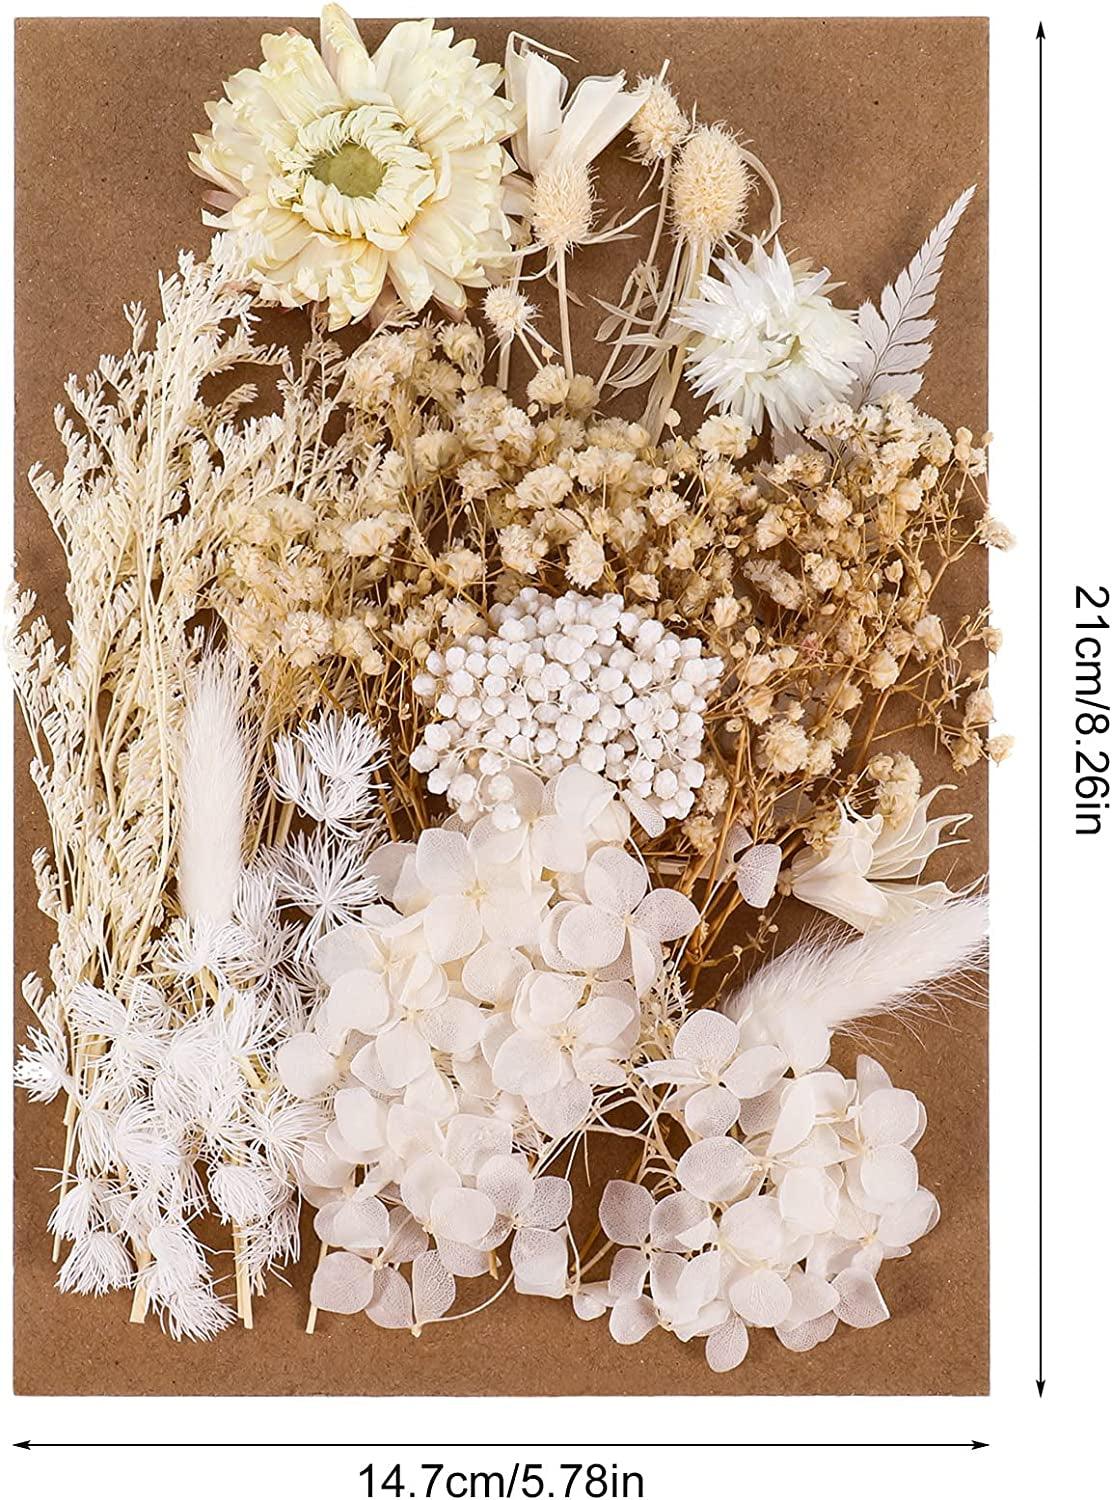 Real Dried Flowers, Natural Dried Flowers Mixed, Hydrangeas, Daisies,  Natural Pressed Flowers White Decorative Dried Flowers for DIY Candle Resin